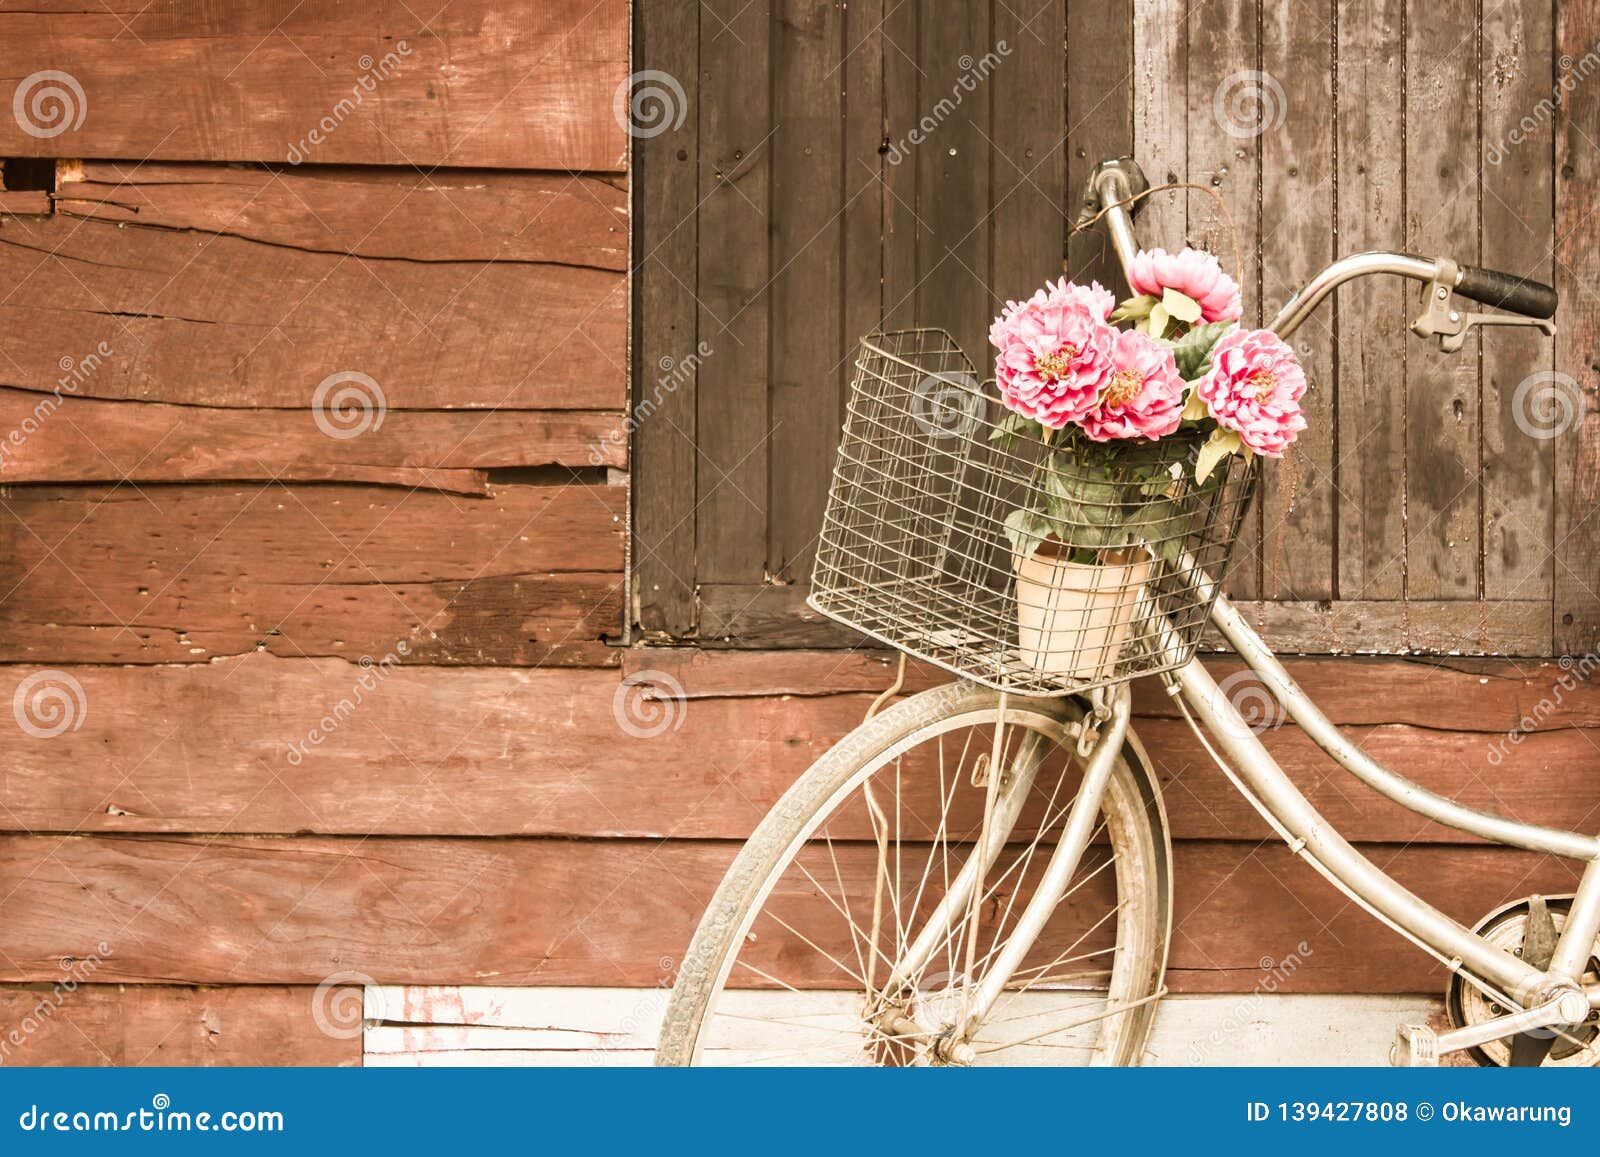 bicycles old vintage flowers in a basket. parked on the sidewall of the wooden house ideal for  work classic hoodie style